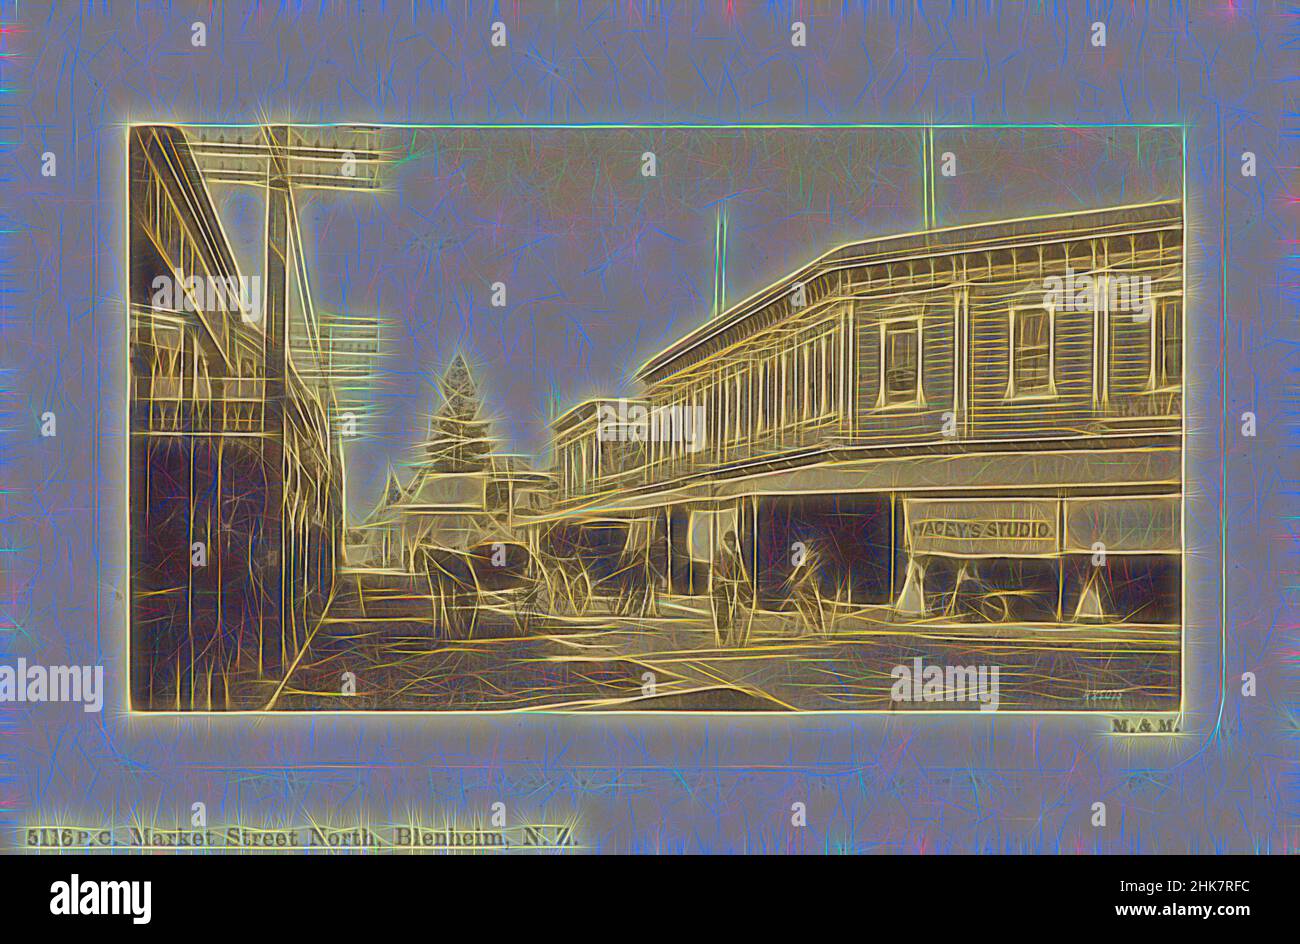 Inspired by Market Street North, Blenheim, New Zealand, Muir & Moodie studio, 1904-1915, Blenheim, Reimagined by Artotop. Classic art reinvented with a modern twist. Design of warm cheerful glowing of brightness and light ray radiance. Photography inspired by surrealism and futurism, embracing dynamic energy of modern technology, movement, speed and revolutionize culture Stock Photo